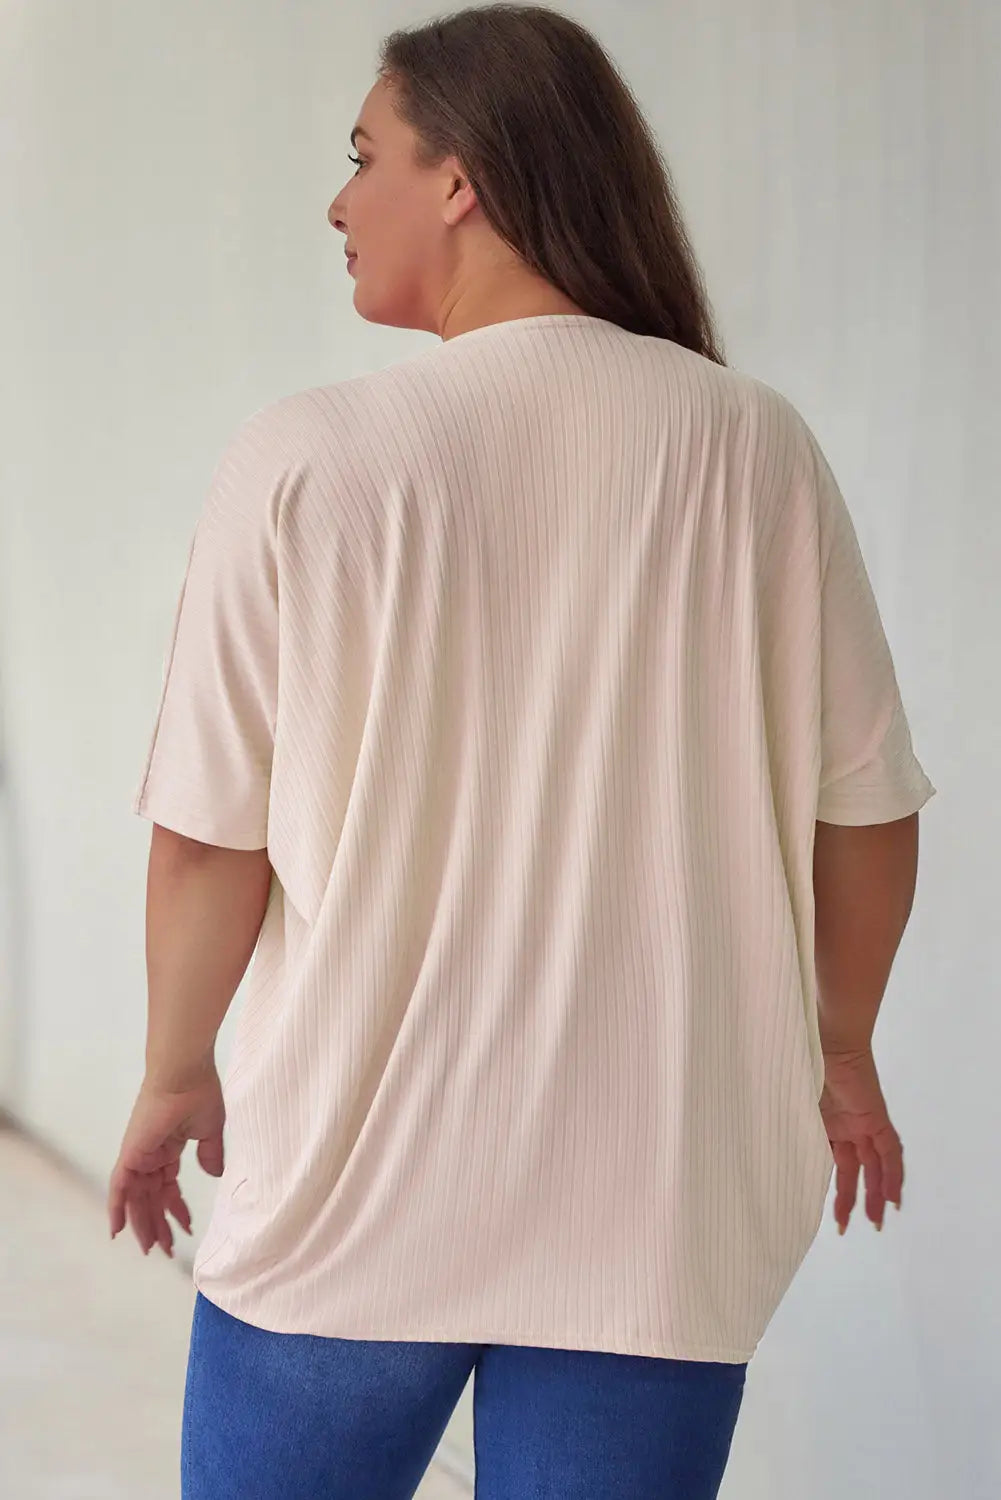 Apricot shimmer ribbed texture plus size cardigan